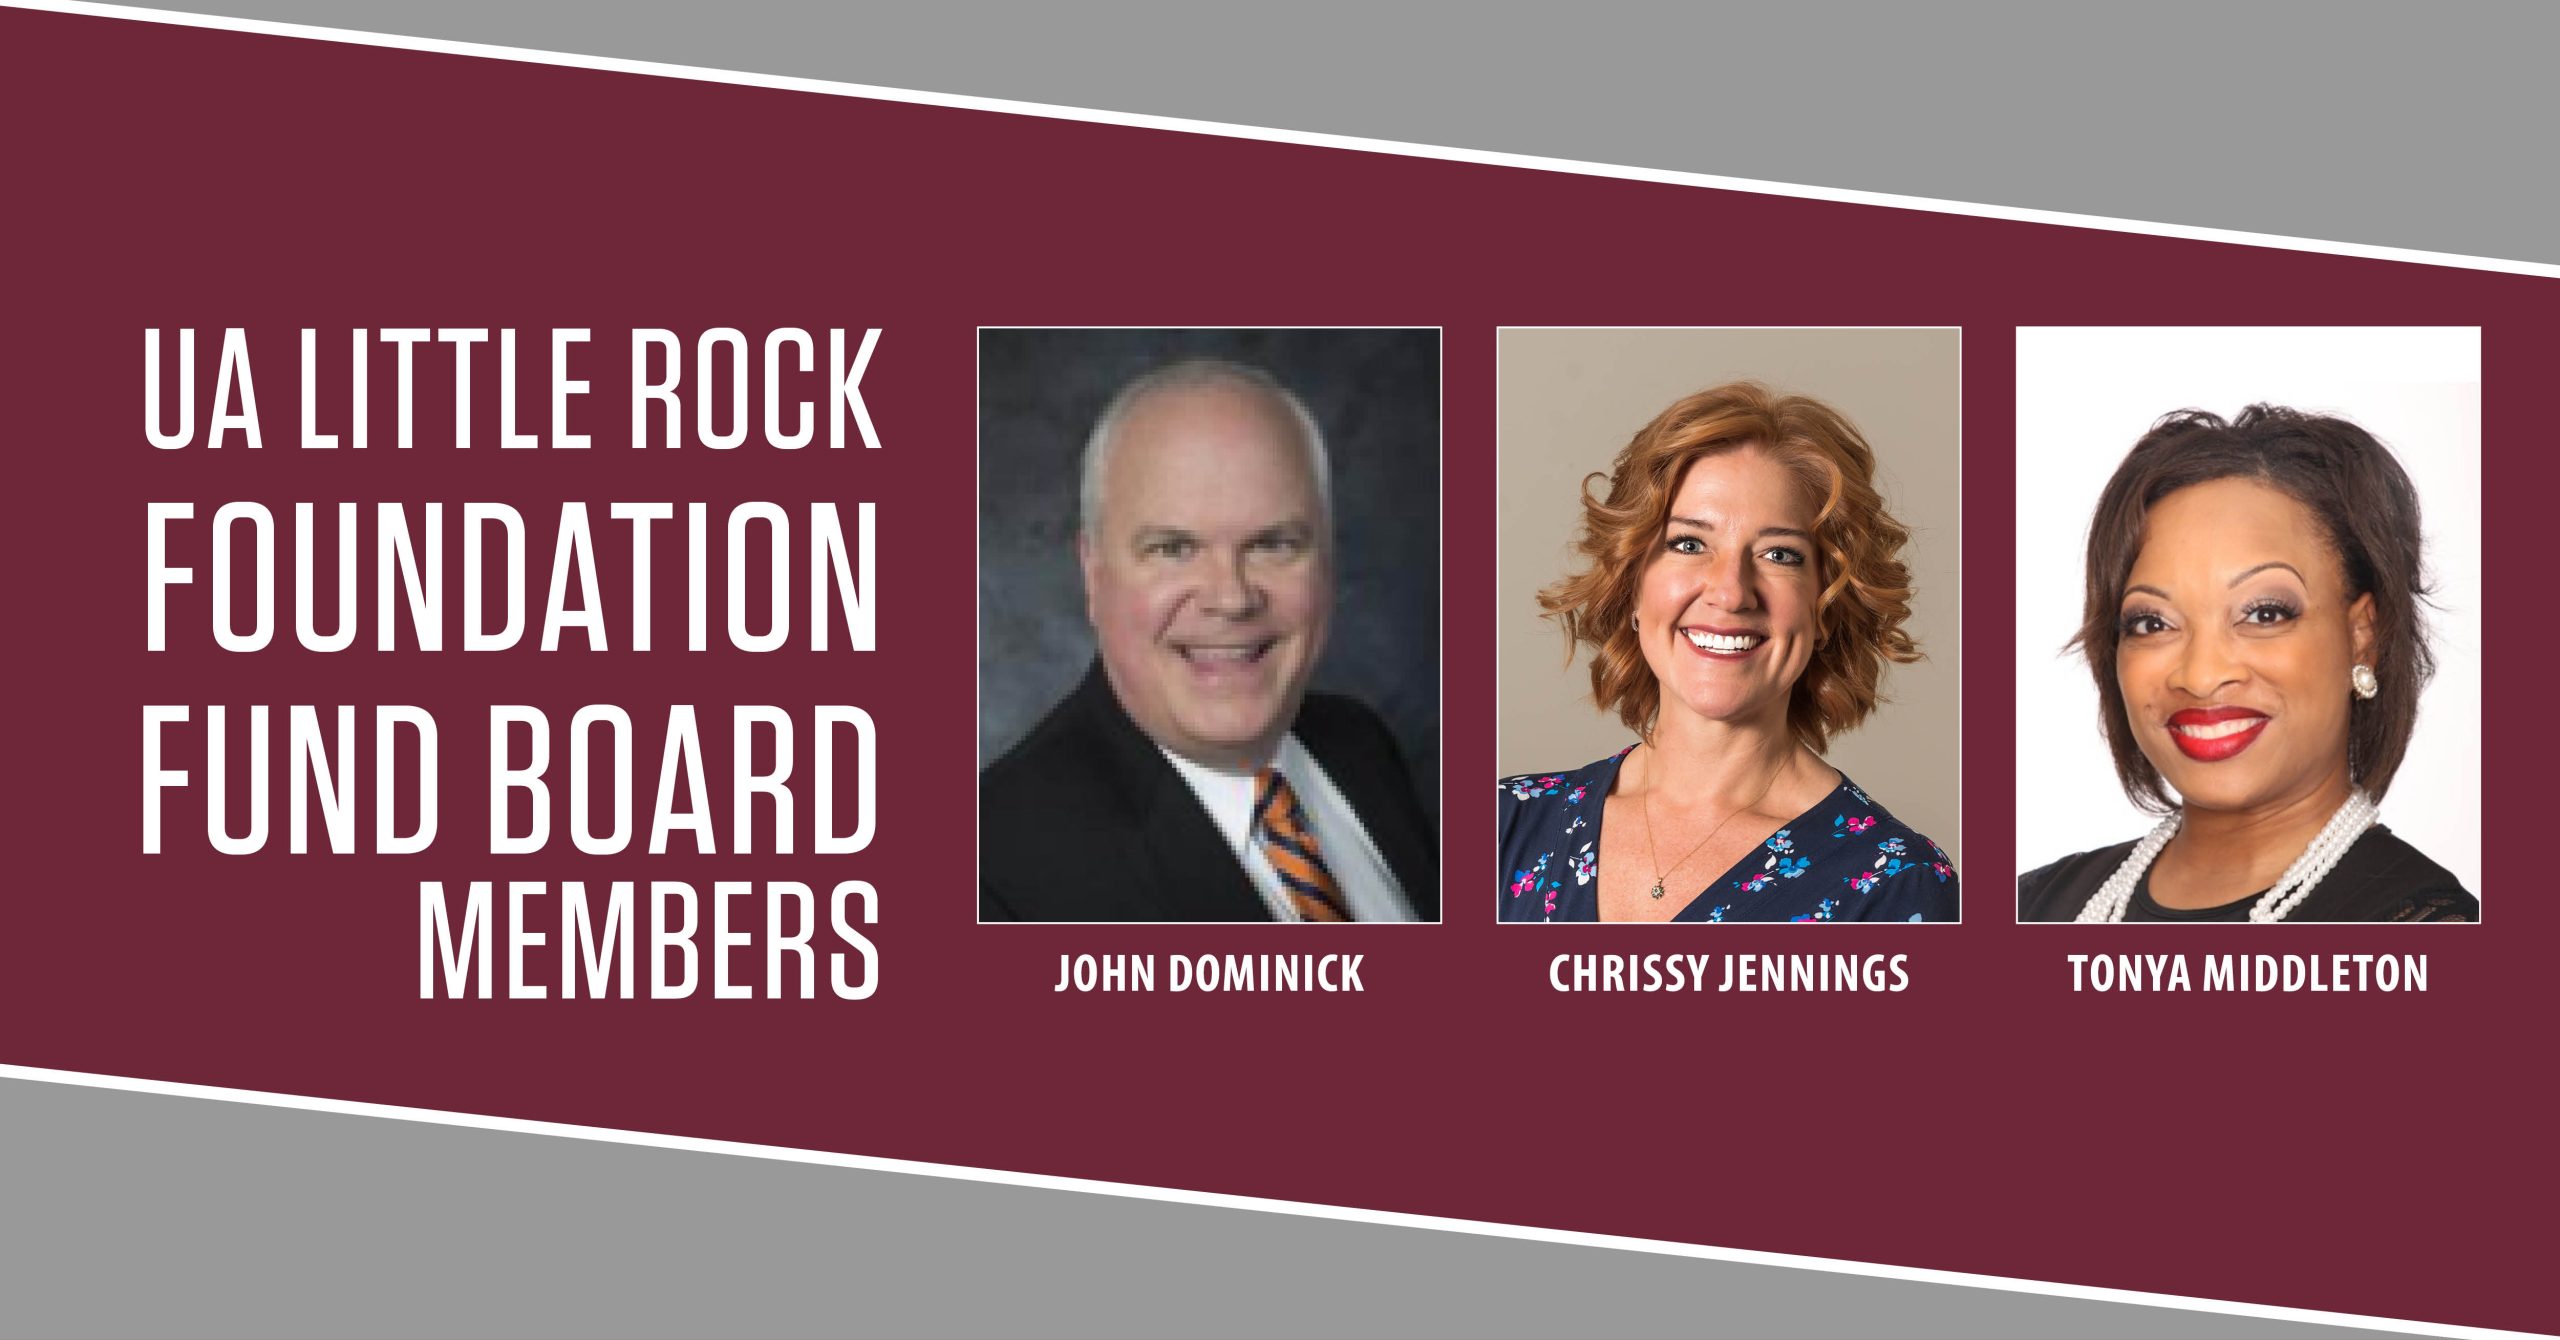 The new members are John Dominick, a director and senior treasury officer at Bank of America; Chrissy Jennings, who has worked for charitable nonprofits for many years; and Tonya Middleton, a senior manager at Entergy Services, LLC.